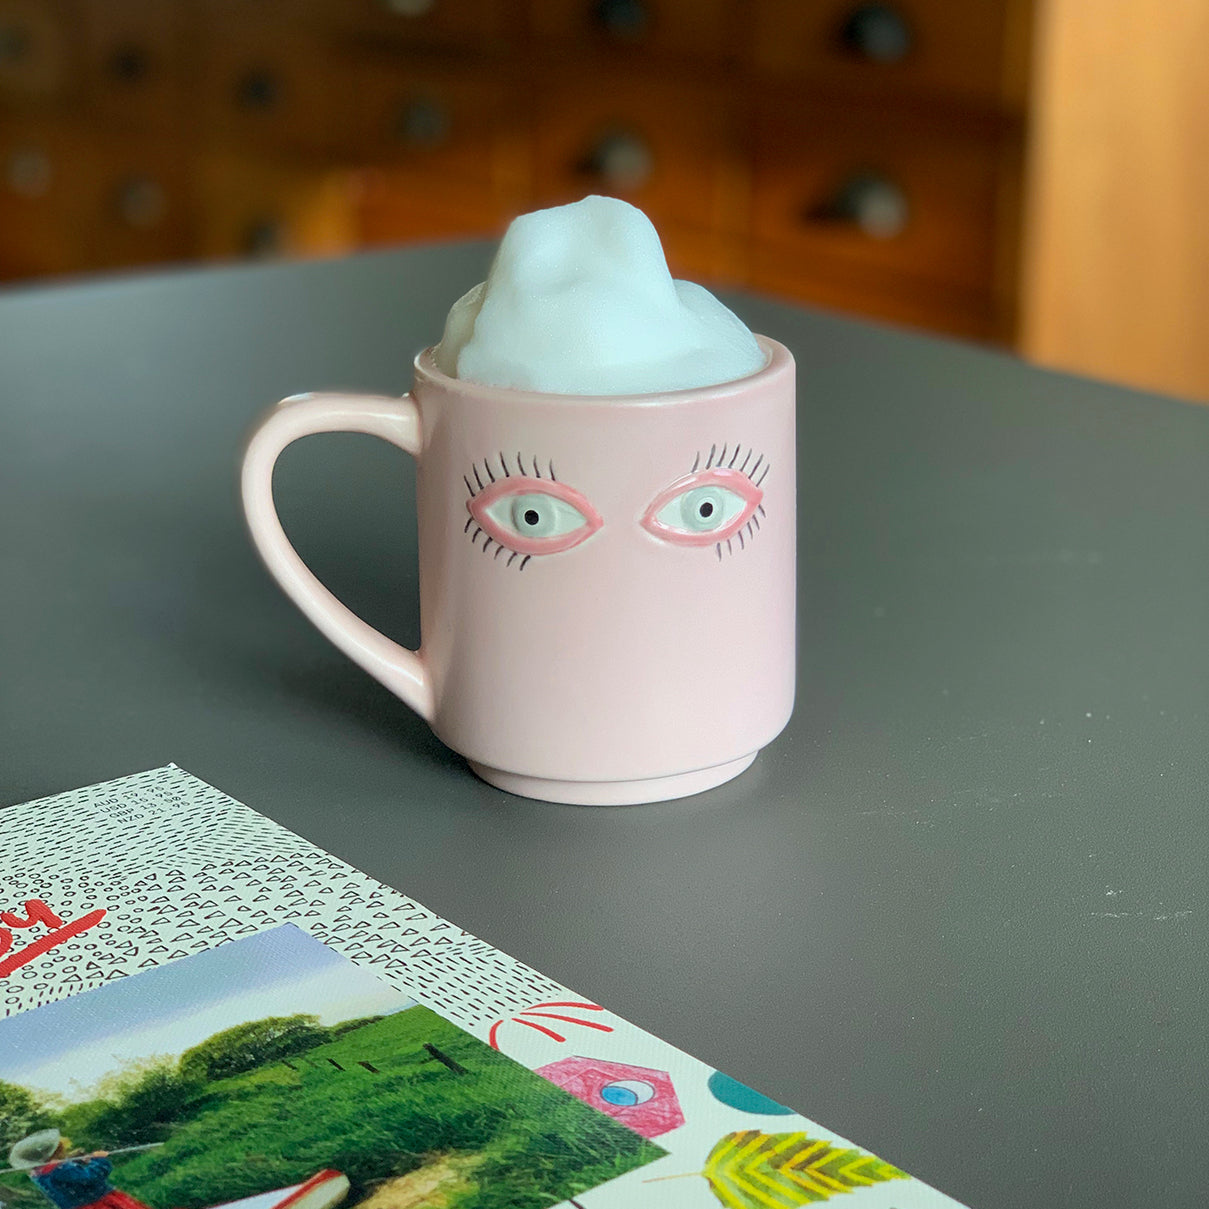 A mug with eyes drawn on by Bitten Design, from their Surreal Mug Set. 